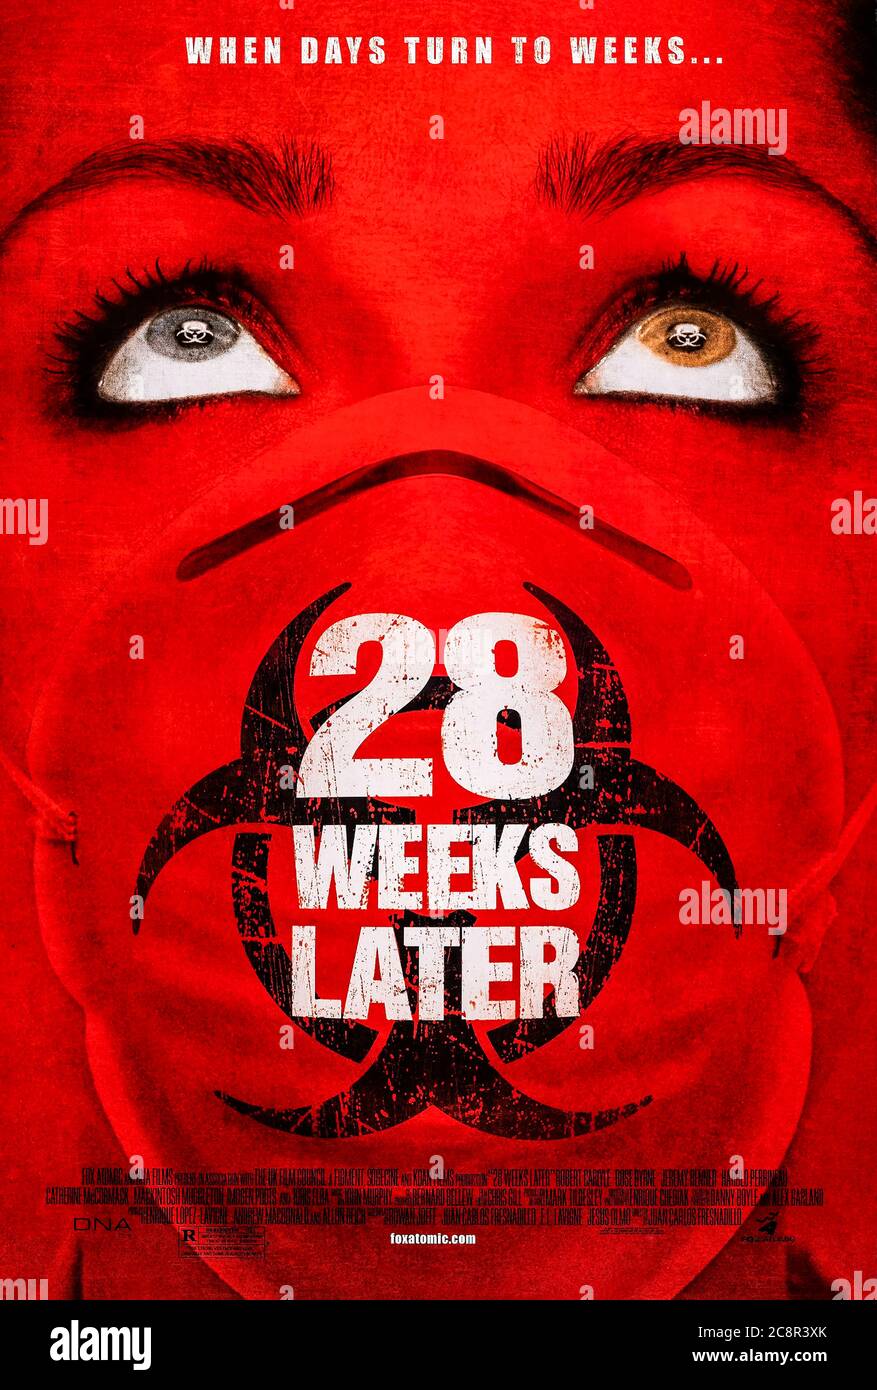 28 Weeks Later (2007) directed by Juan Carlos Fresnadillo and starring Jeremy Renner, Rose Byrne, Robert Carlyle and Catherine McCormack. Sequel set 6 months after the outbreak of the Rage virus that turns the infected in to violent monsters where the US army help survivors repopulate London. Stock Photo